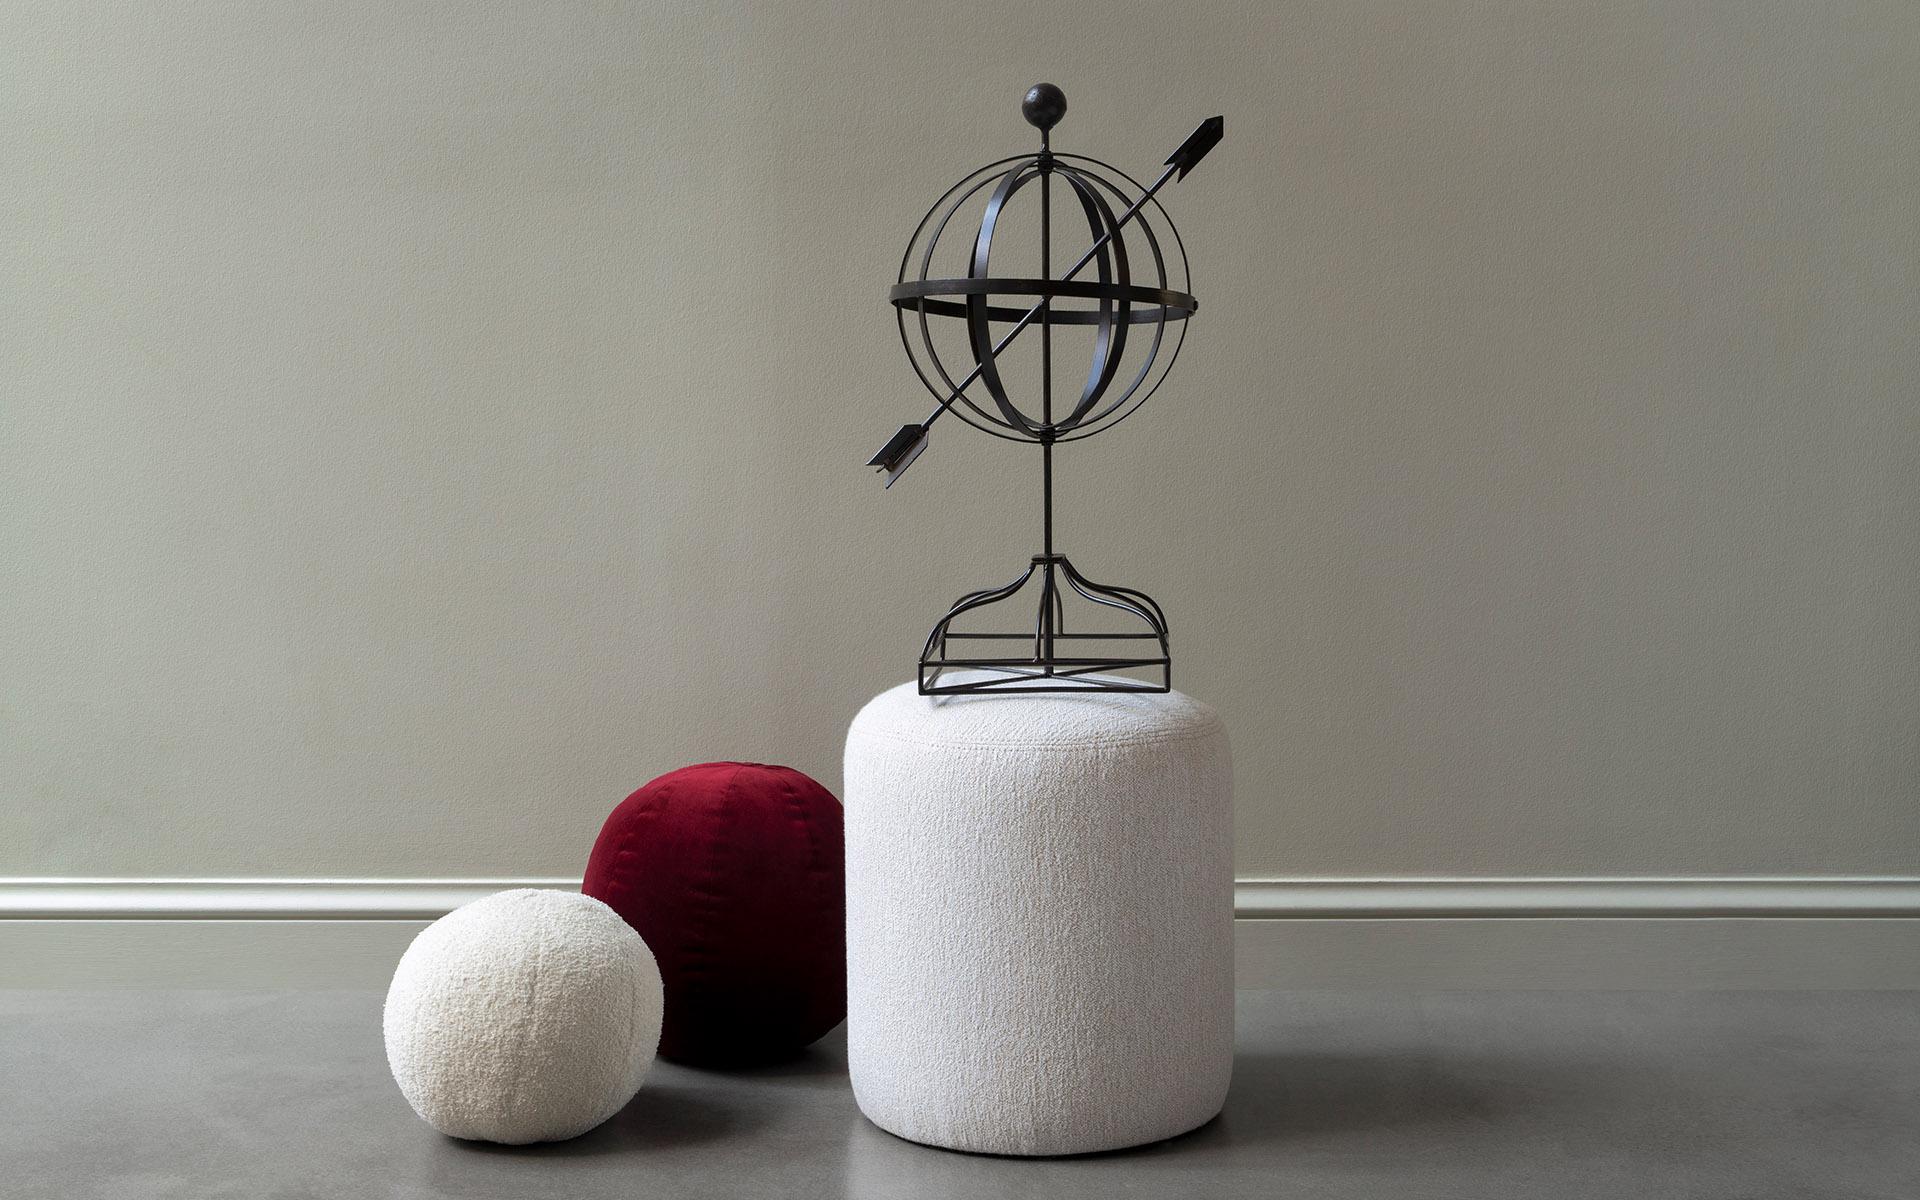 Fuyu Cylinder Pouf adds an aesthetic atmosphere to many spaces with its modern design, while providing a comfortable seating experience. With its minimalist and compact structure, it provides an elegant touch to your decoration and is the perfect